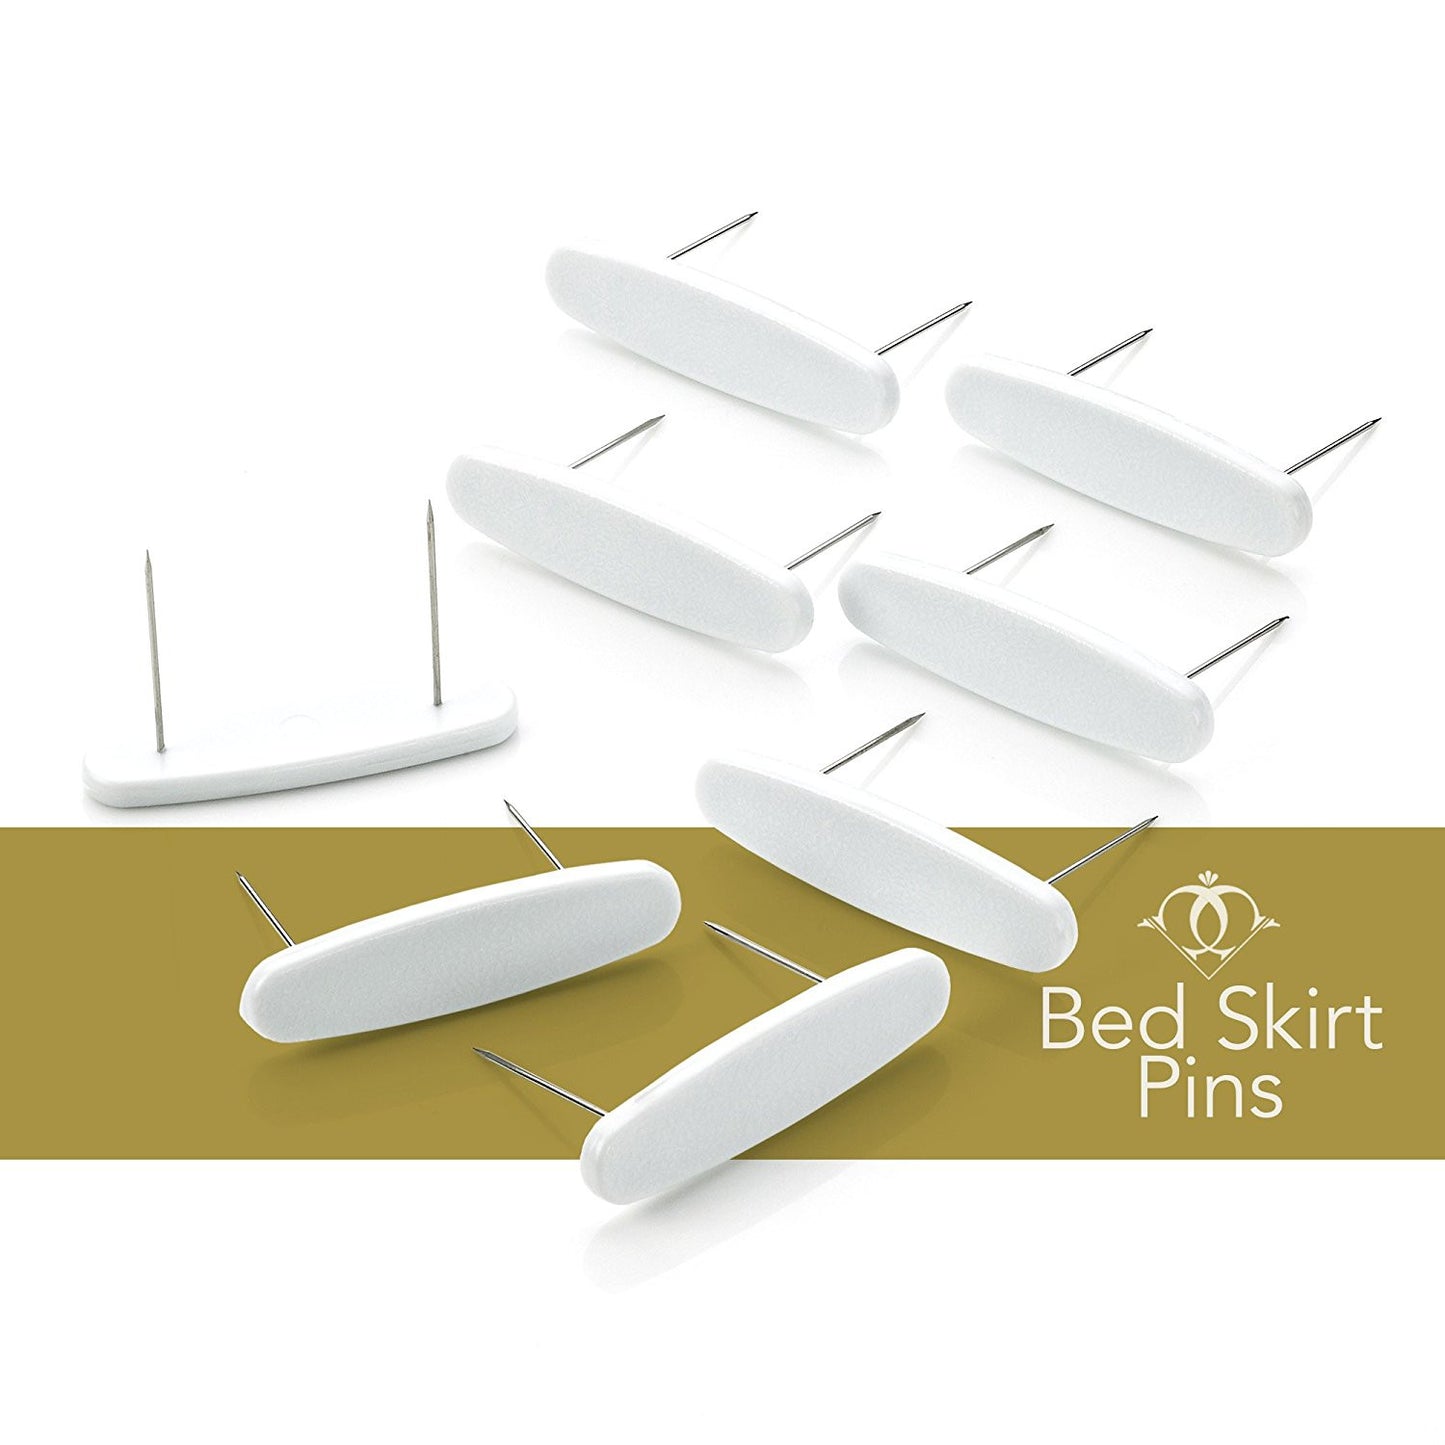 Bed Skirt Pins - 8 Pieces